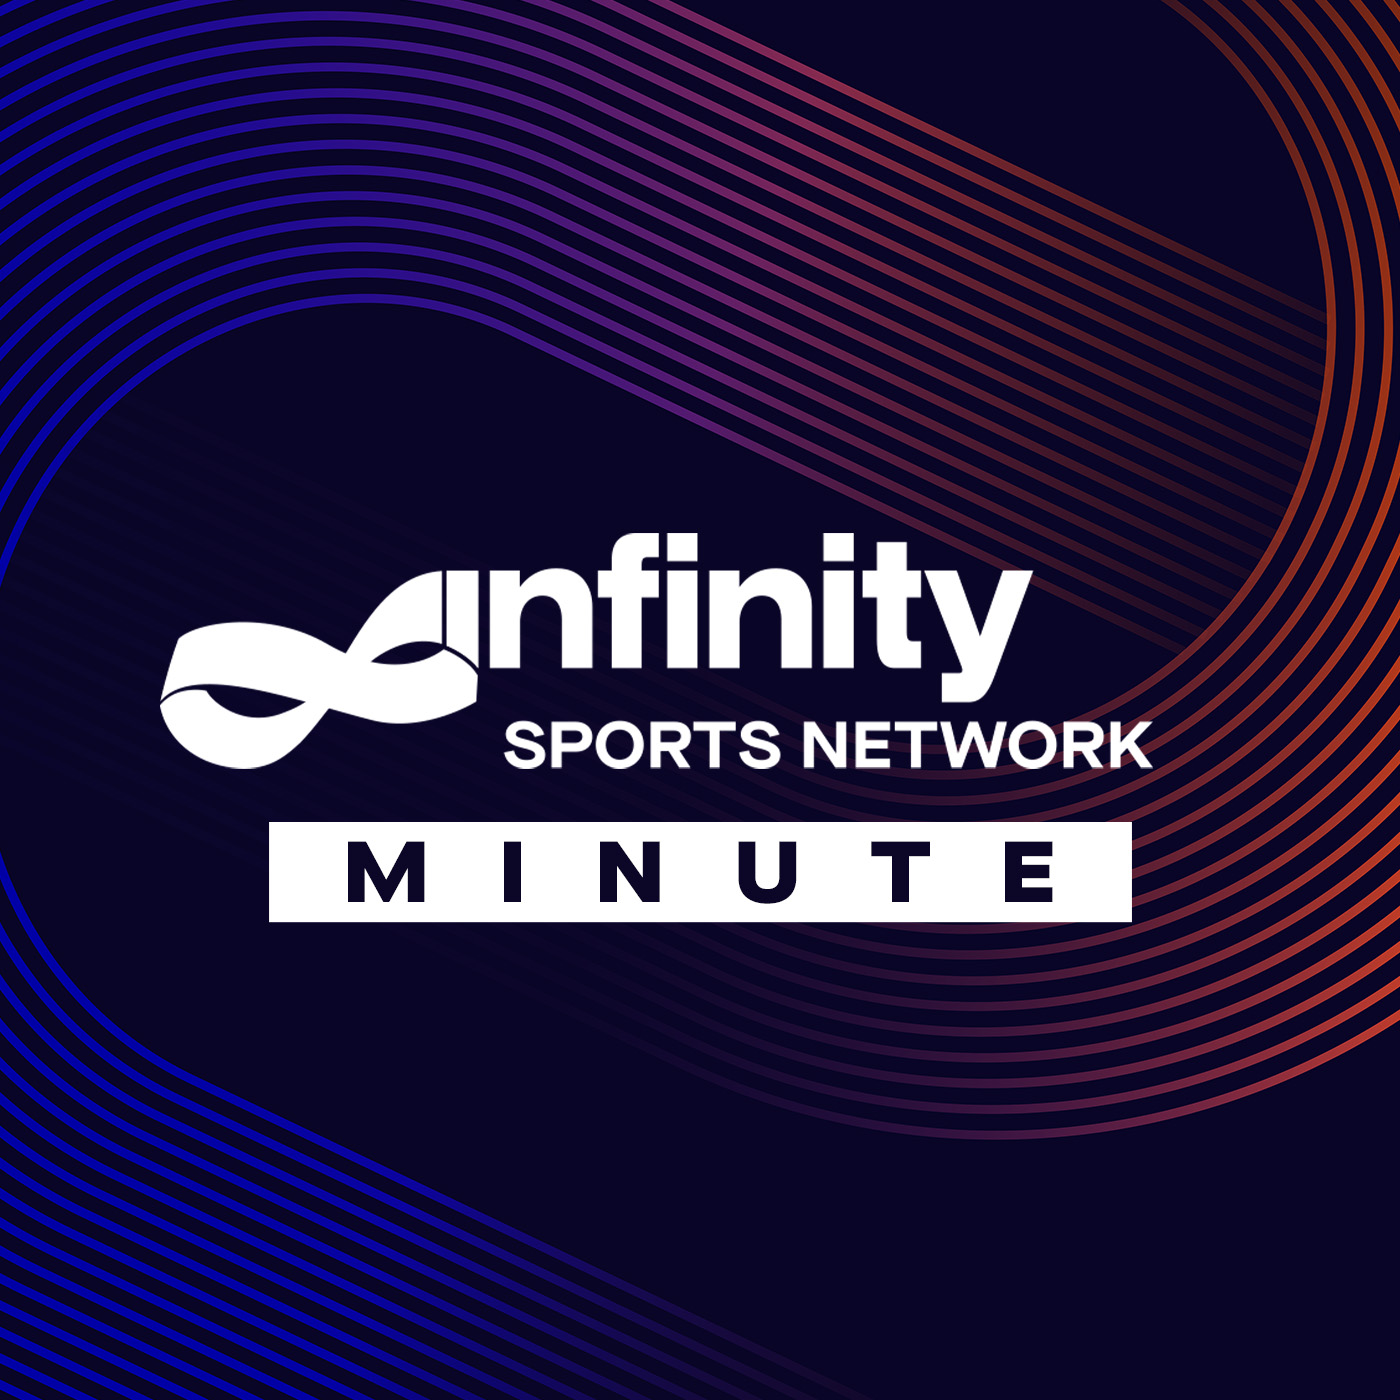 6-25 Bart Winkler Sports Minute on Oilers vs. Panthers